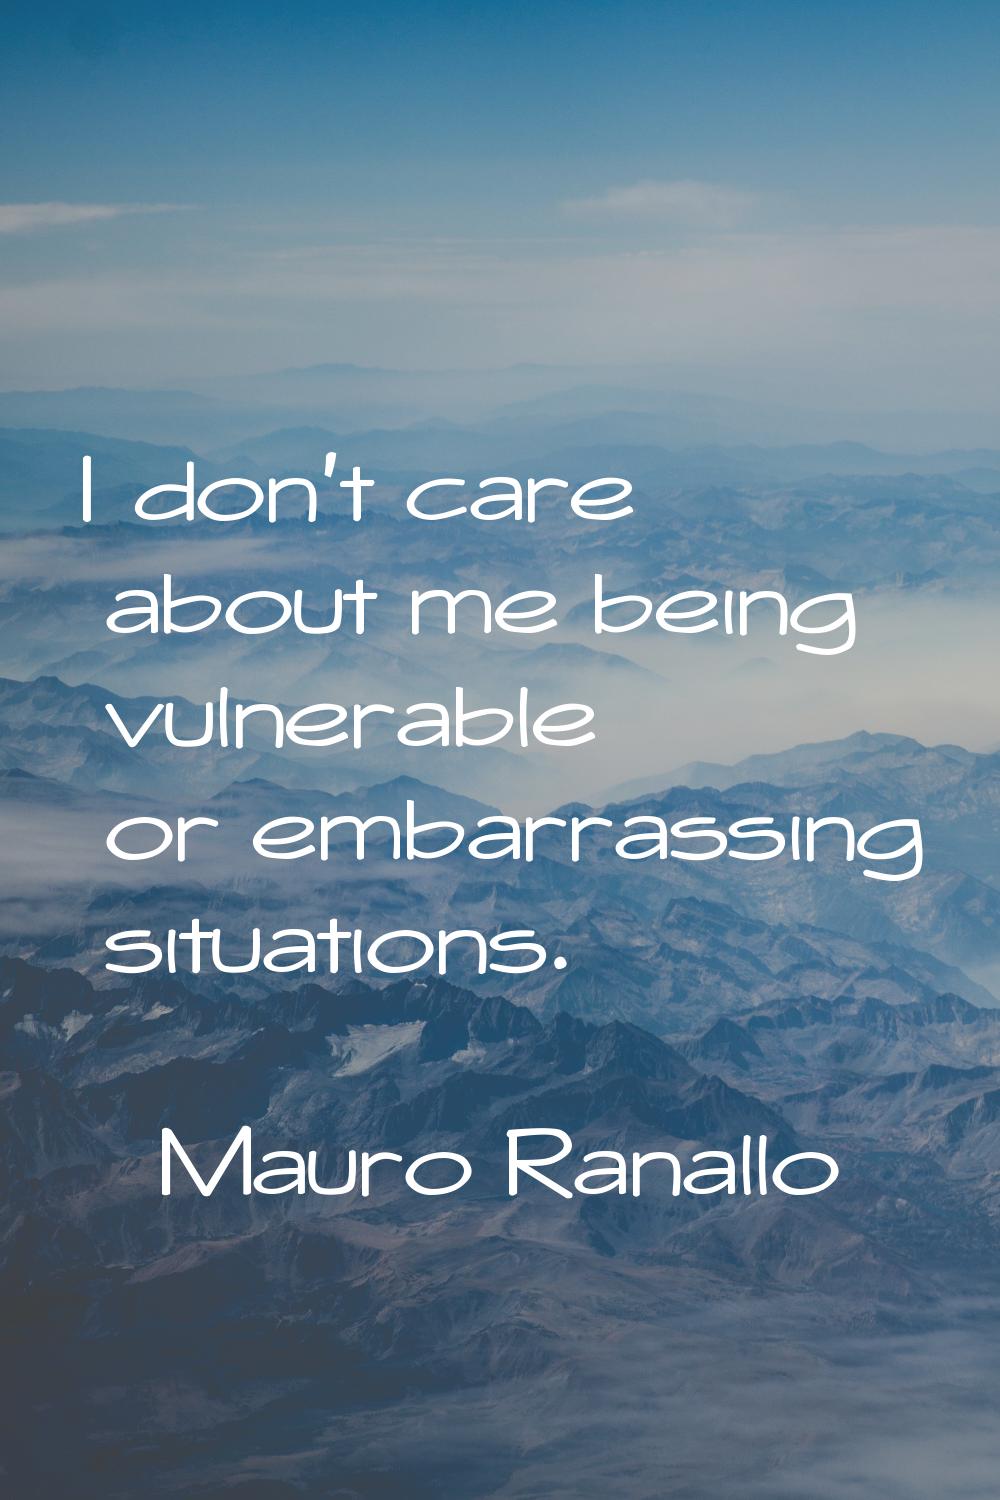 I don't care about me being vulnerable or embarrassing situations.